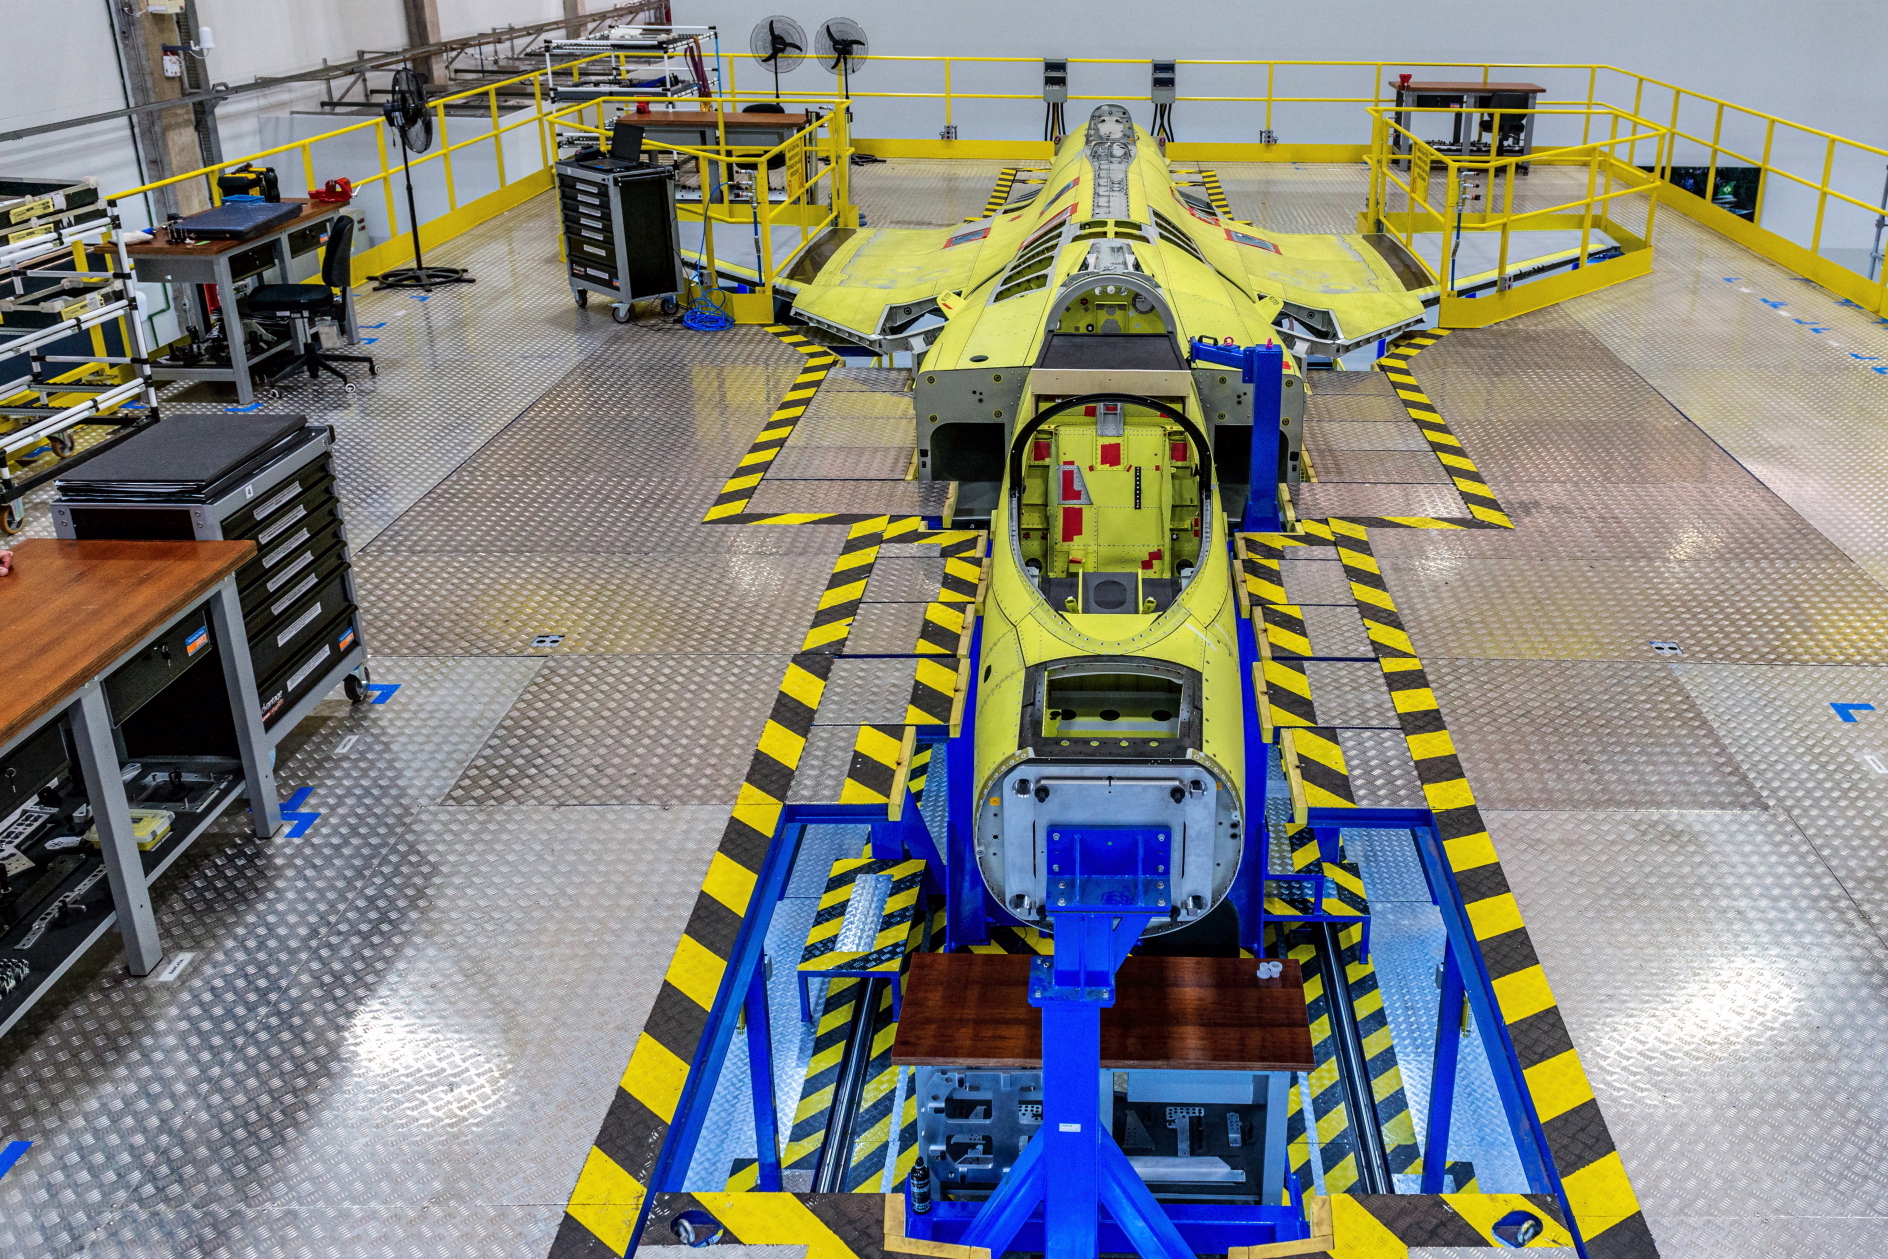 Saab's Gripen E production line at Embraer's plant in Gavião Peixoto, São Paulo, Brazil. Click to enlarge.